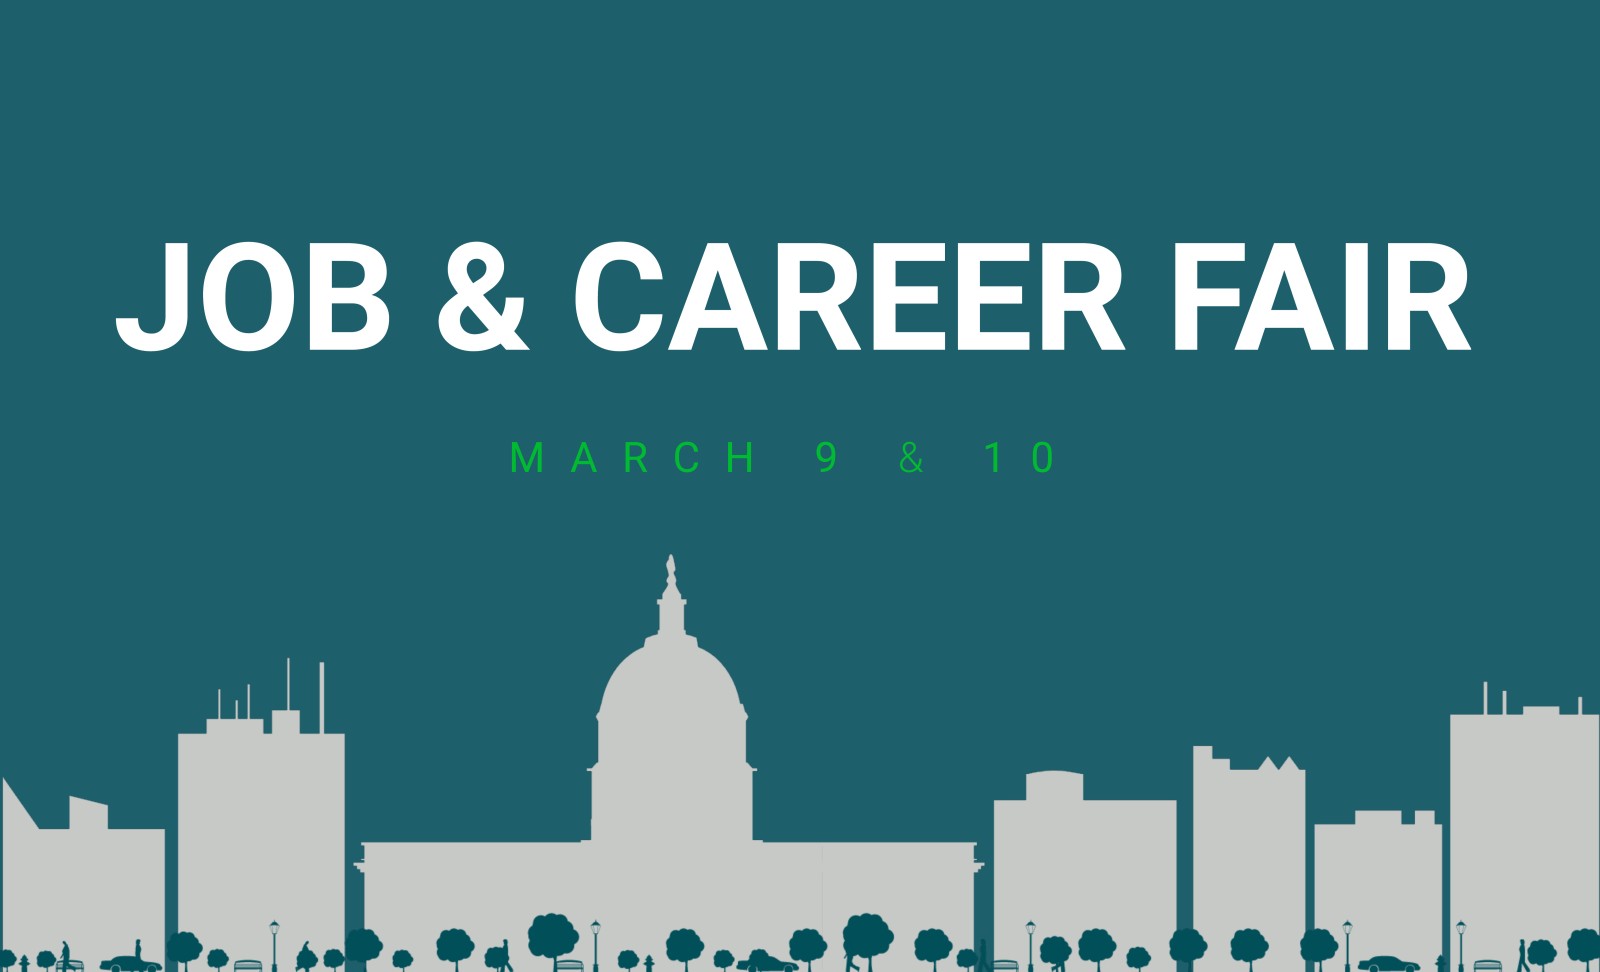 Job and Career Fair March 9 and 10